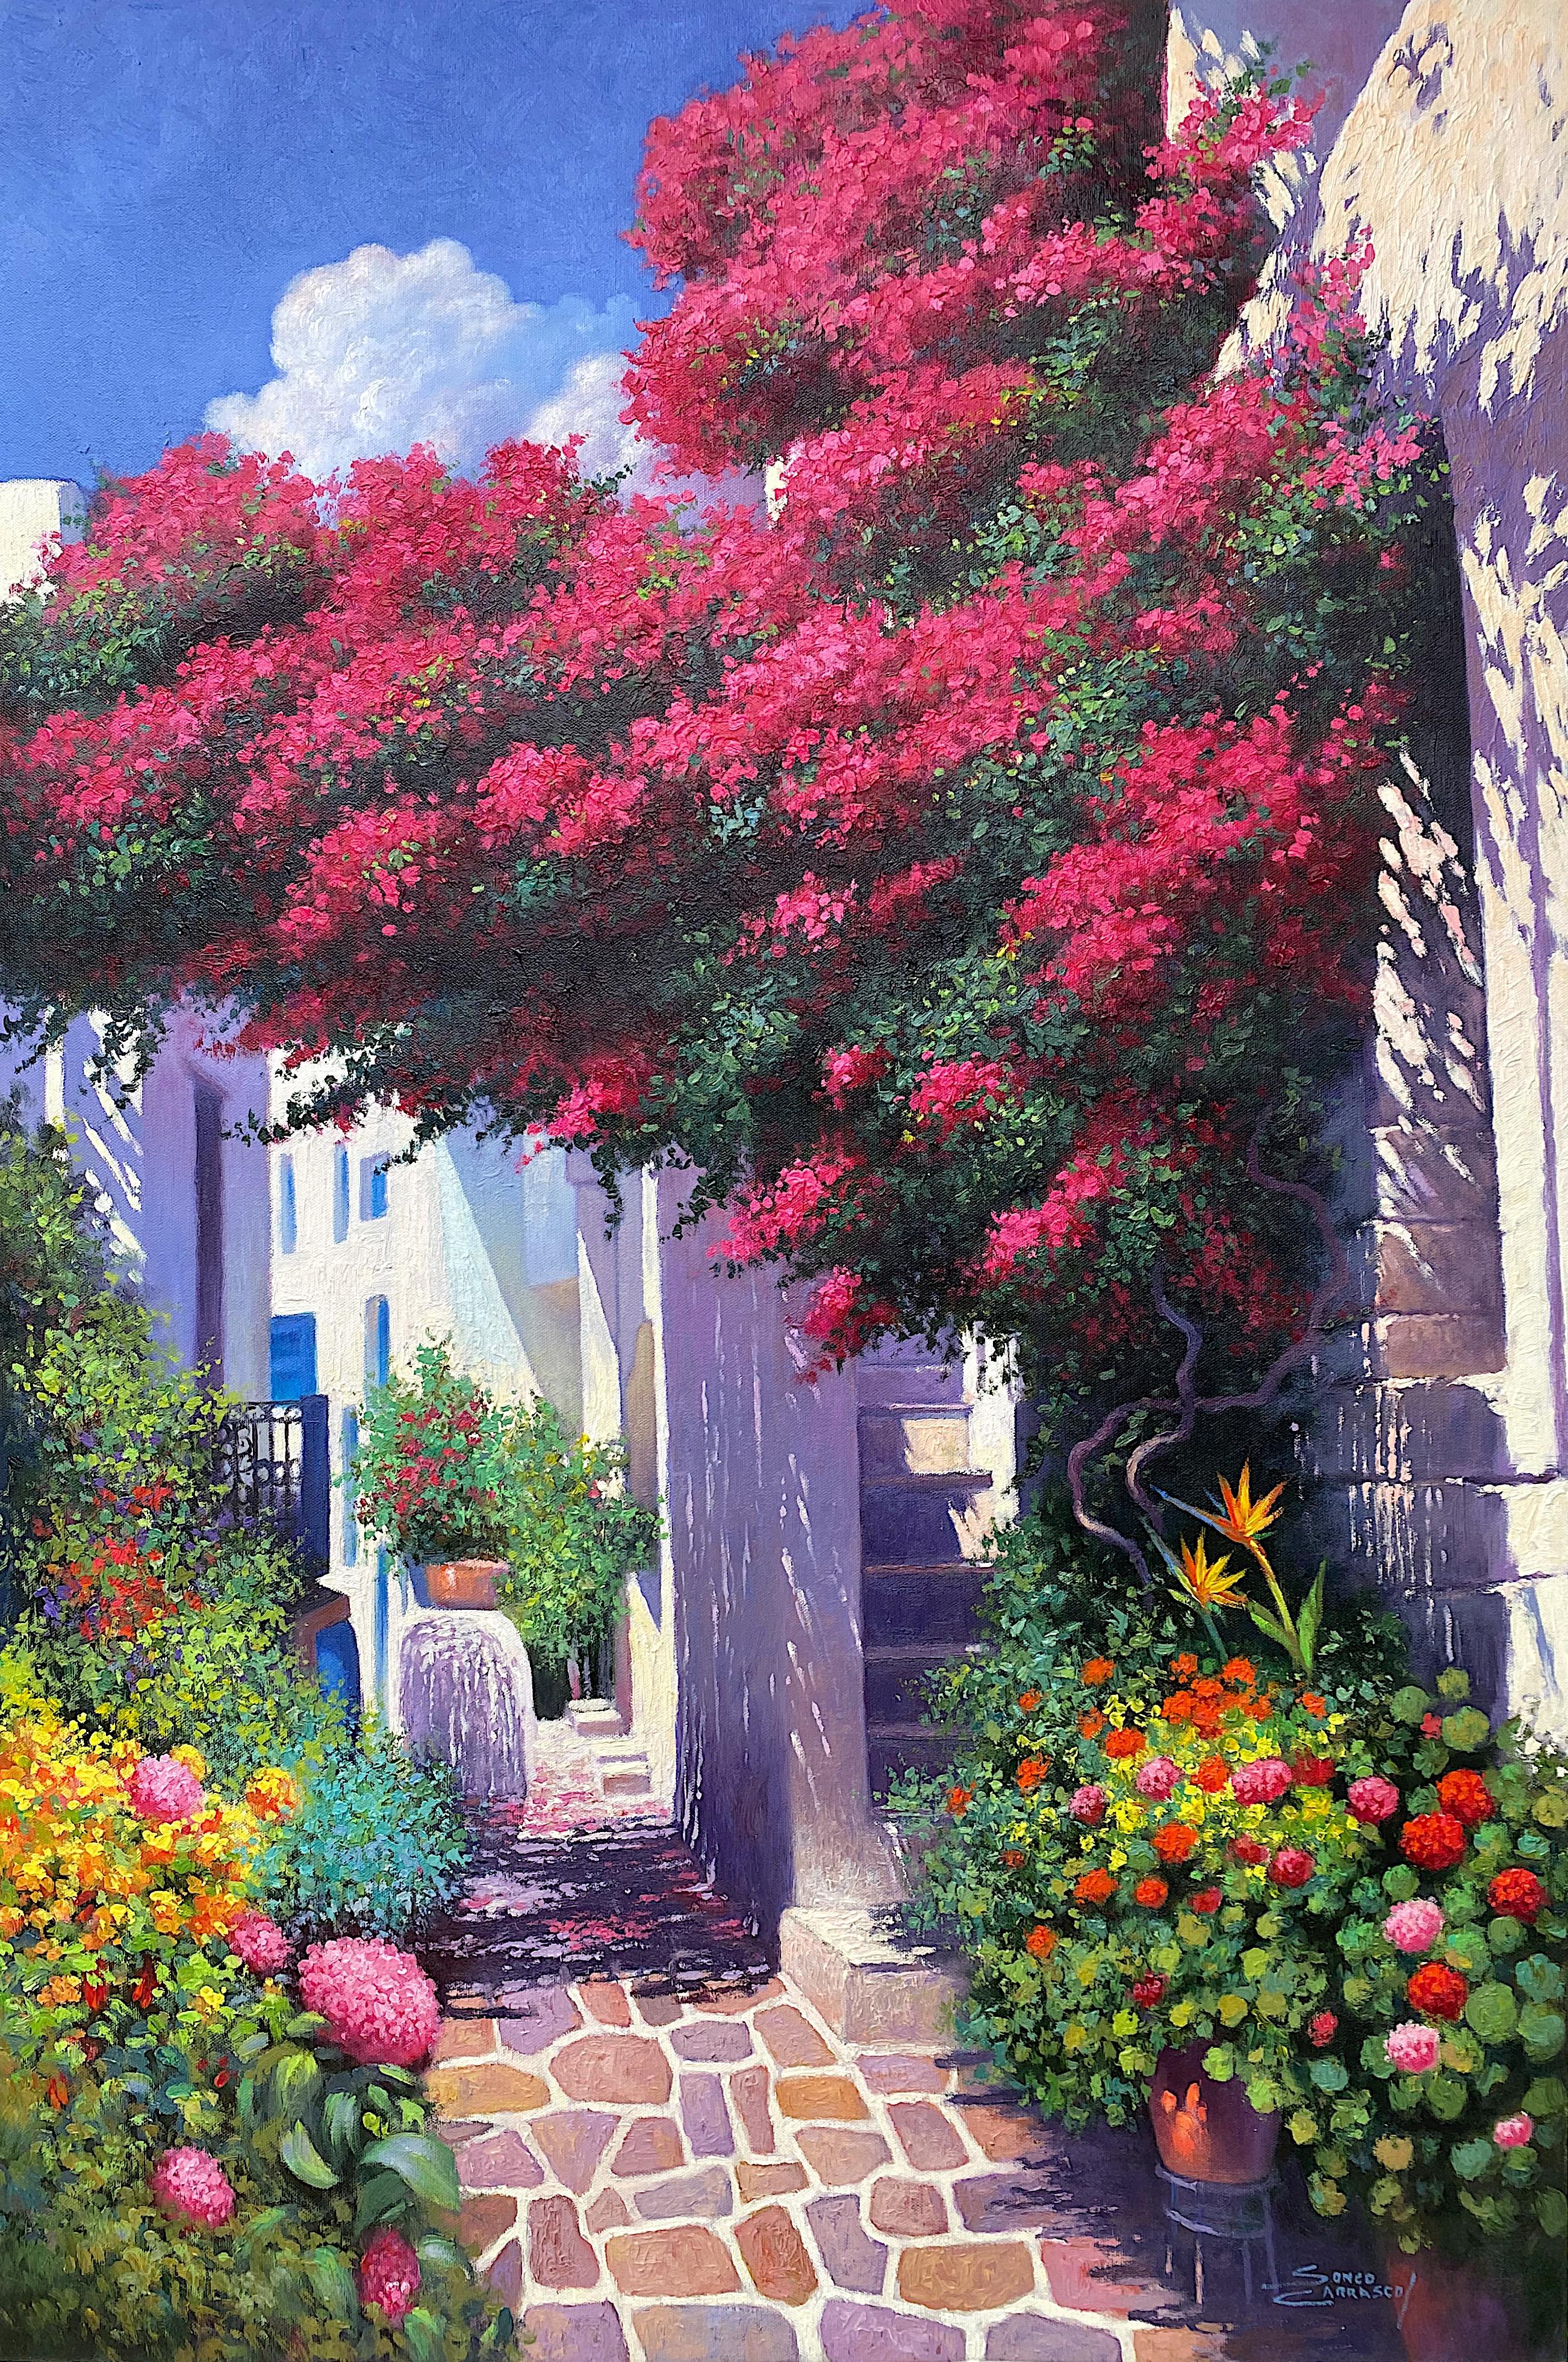 Sonco Carrasco Landscape Painting - Pathway in Greece I - Original oil painting - Impressionist